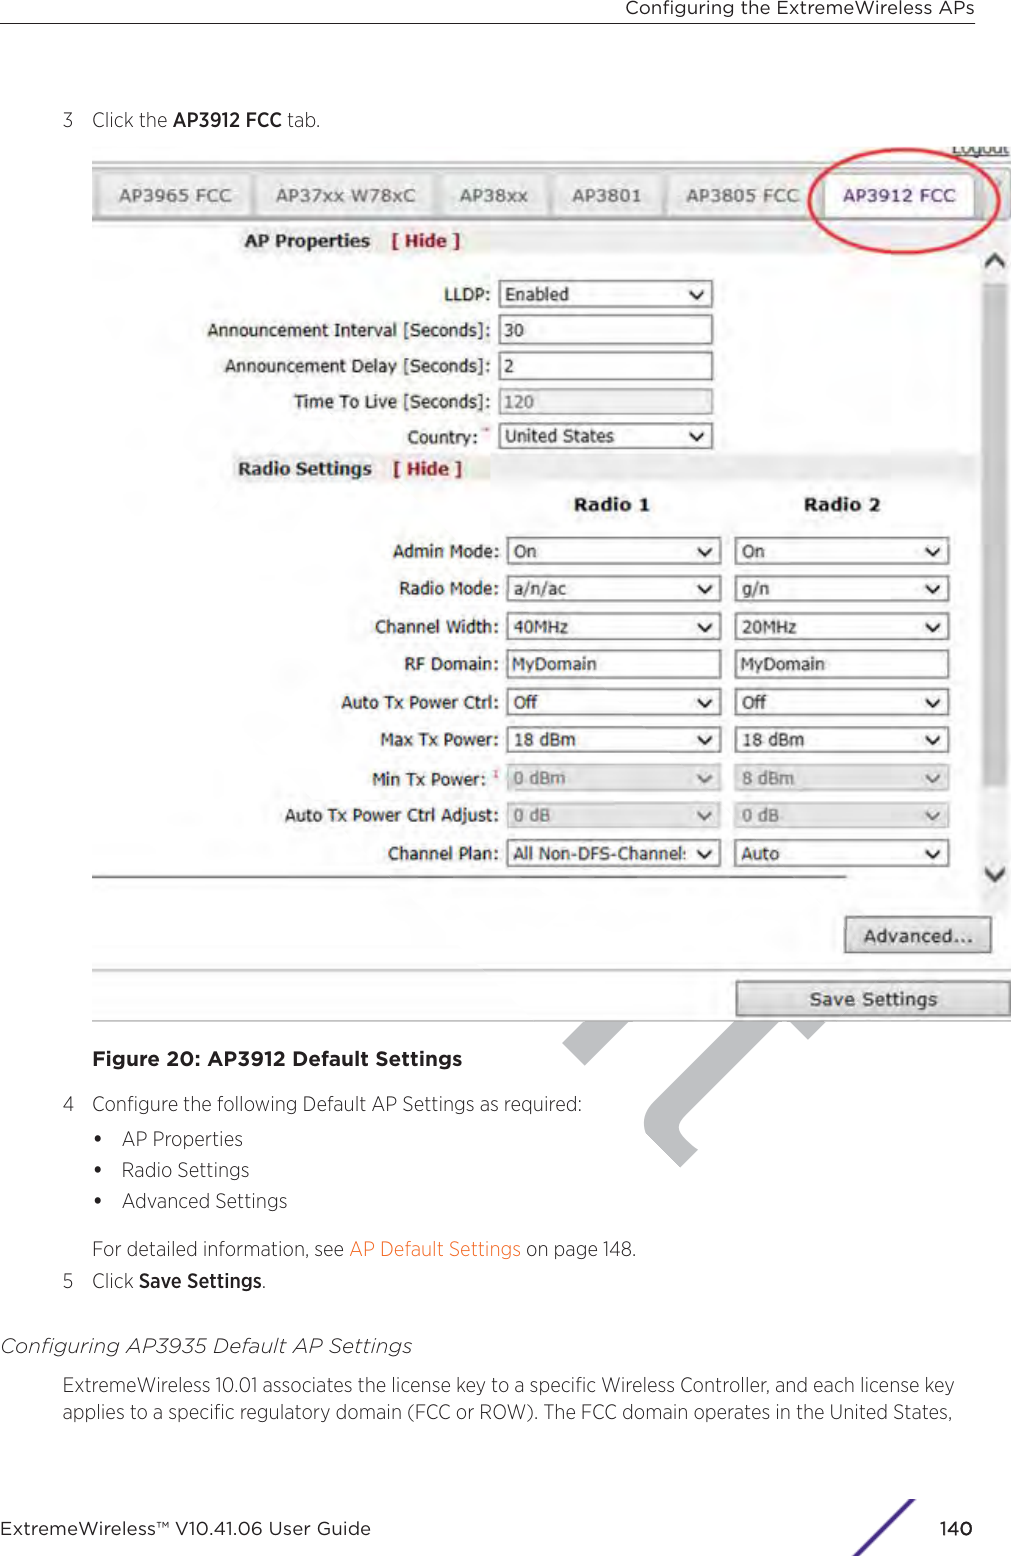 ft3 Click the AP3912 FCC tab.Figure 20: AP3912 Default Settings4 Conﬁgure the following Default AP Settings as required:•AP Properties•Radio Settings•Advanced SettingsFor detailed information, see AP Default Settings on page 148.5 Click Save Settings.Conﬁguring AP3935 Default AP SettingsExtremeWireless 10.01 associates the license key to a speciﬁc Wireless Controller, and each license keyapplies to a speciﬁc regulatory domain (FCC or ROW). The FCC domain operates in the United States,Conﬁguring the ExtremeWireless APsExtremeWireless™ V10.41.06 User Guide 1140